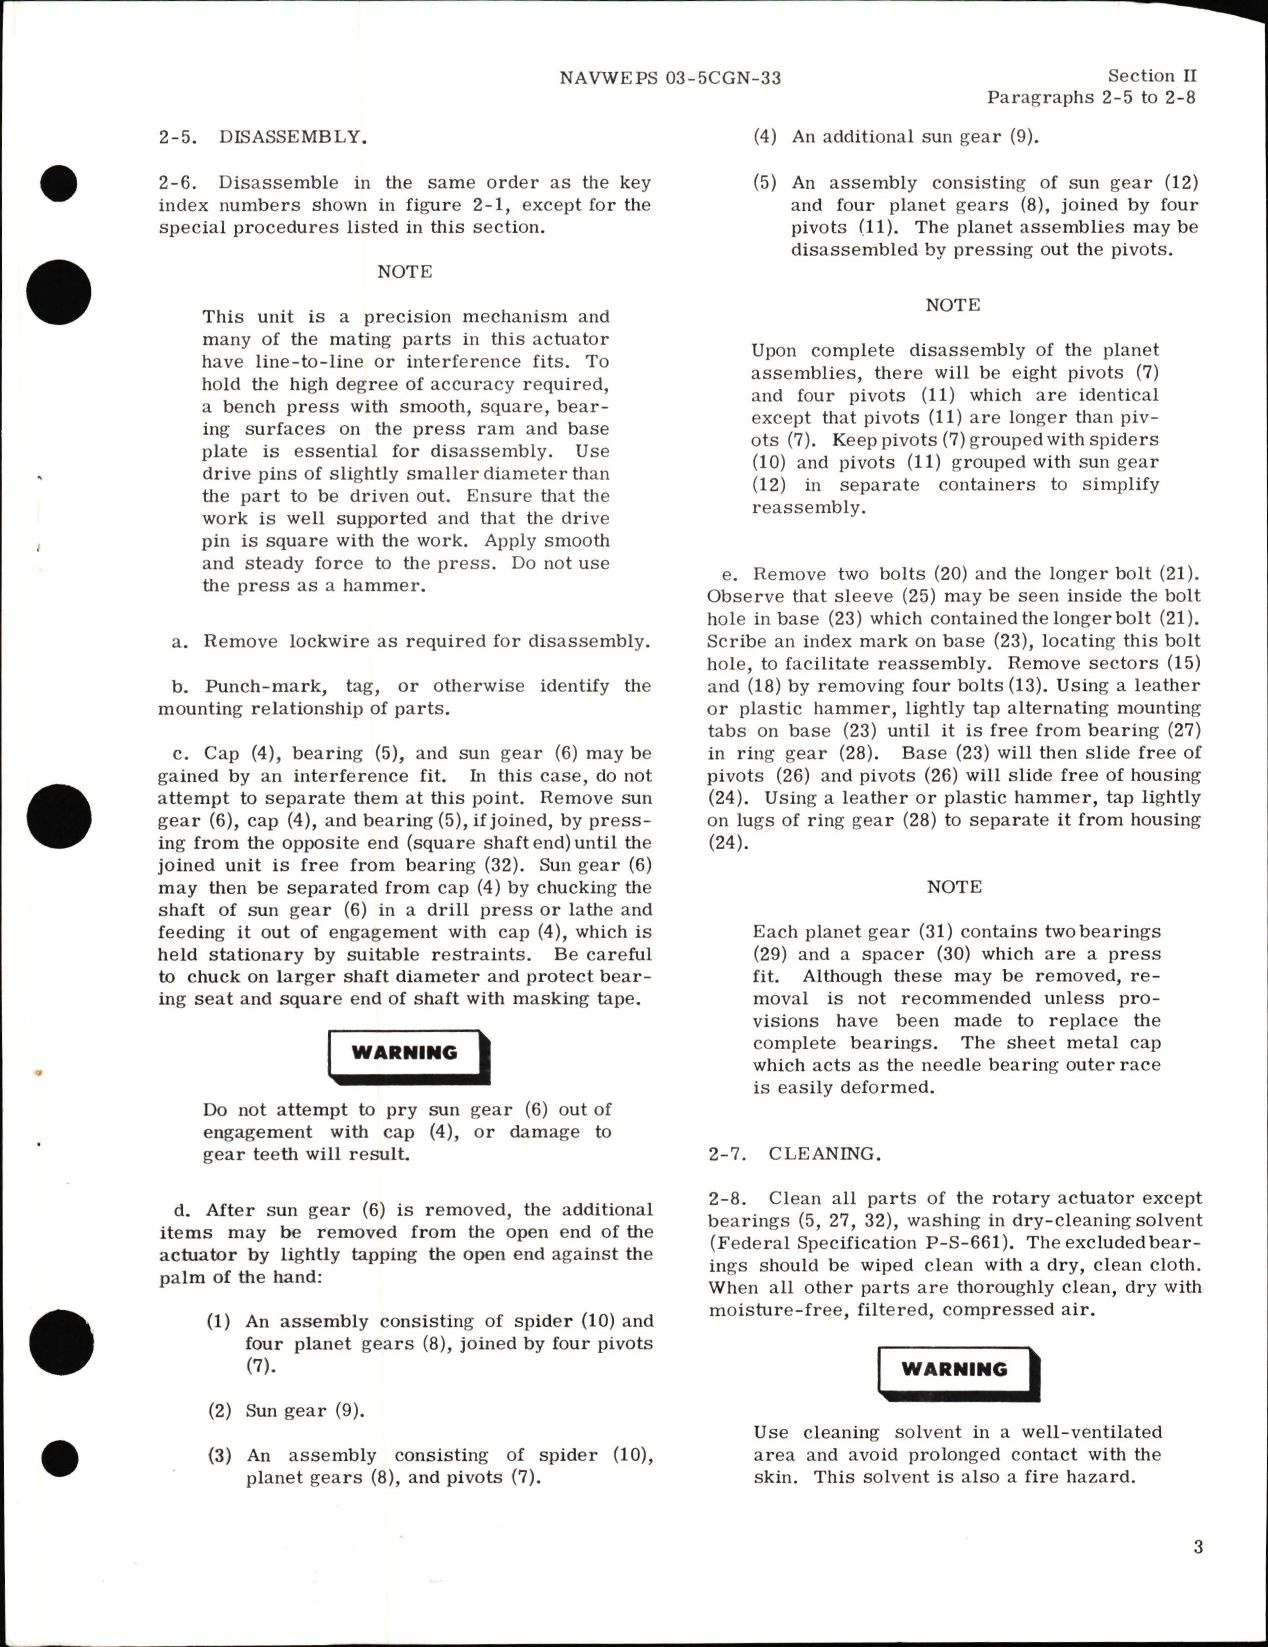 Sample page 5 from AirCorps Library document: Overhaul Instructions for BLC Valve Rotary Actuator Assembly - Part 279-526220 